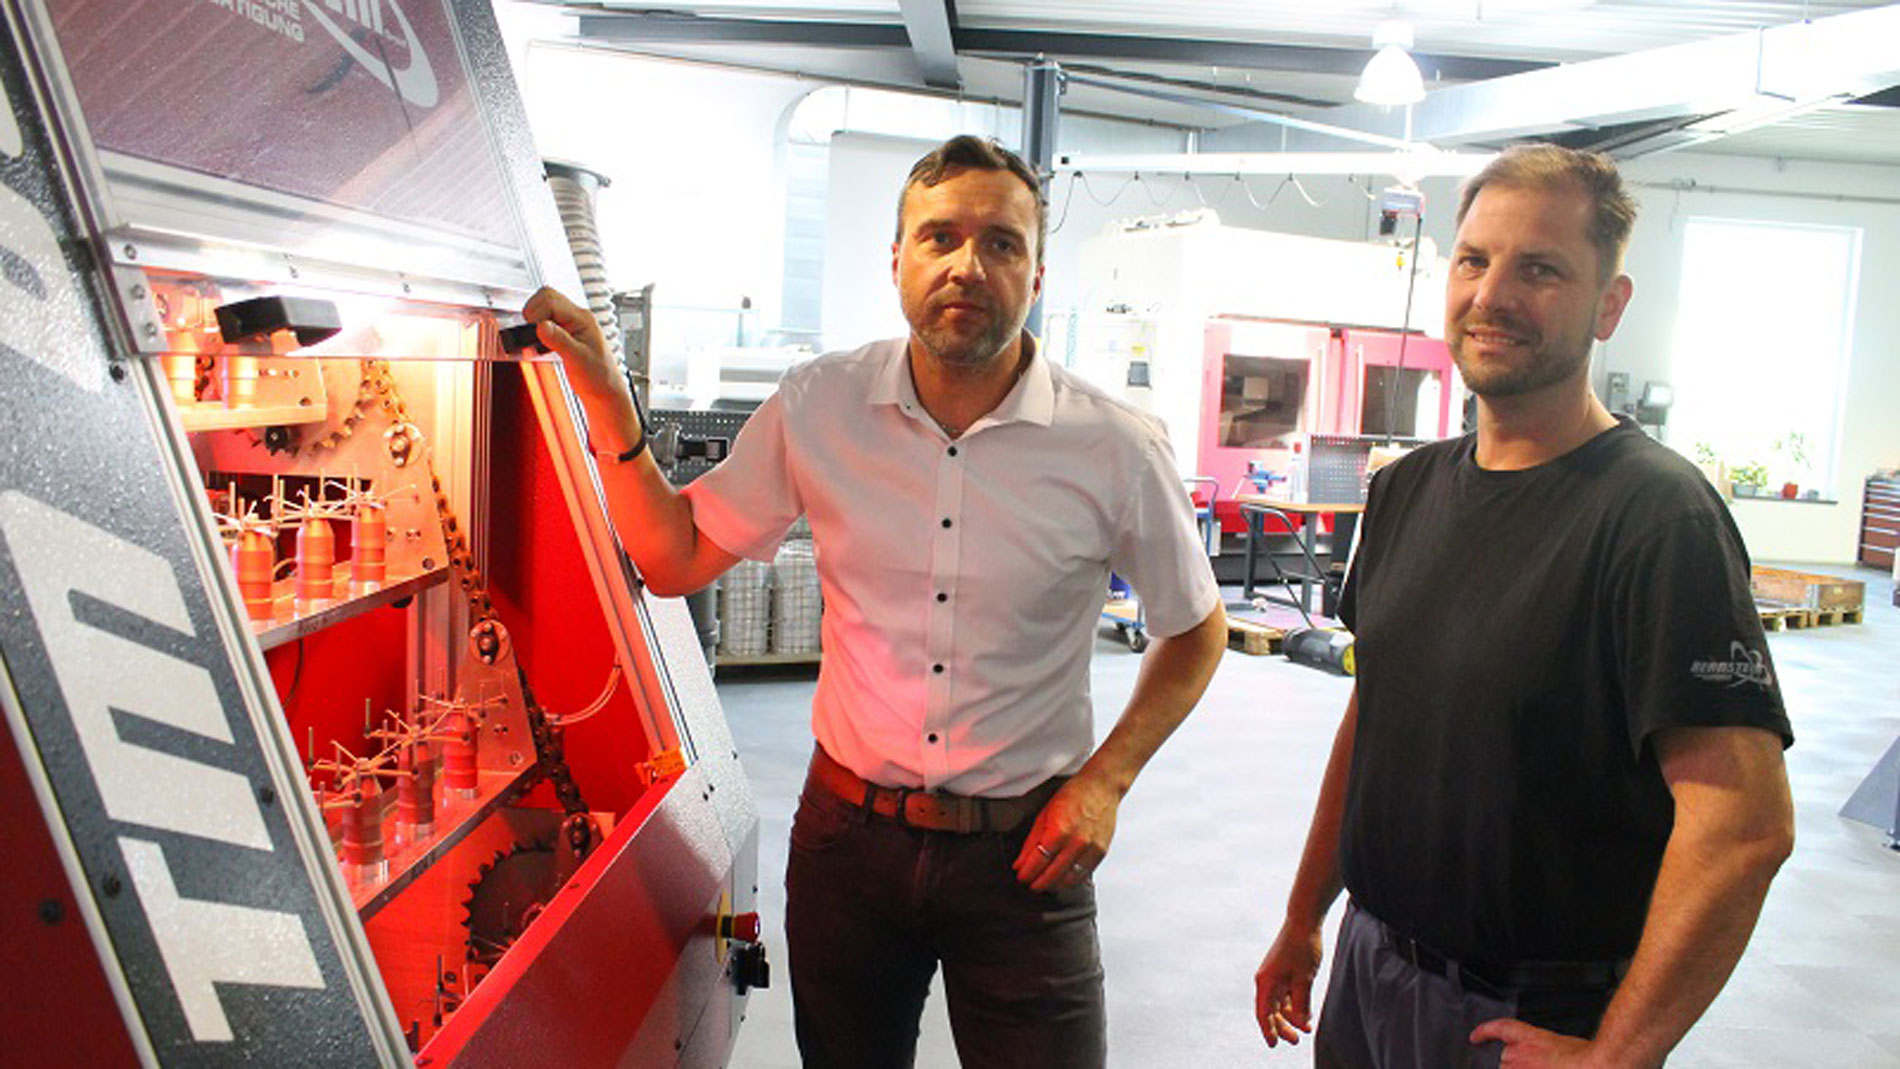 Ronny Bernstein (left) and Marc Krause in the Grüna facility.